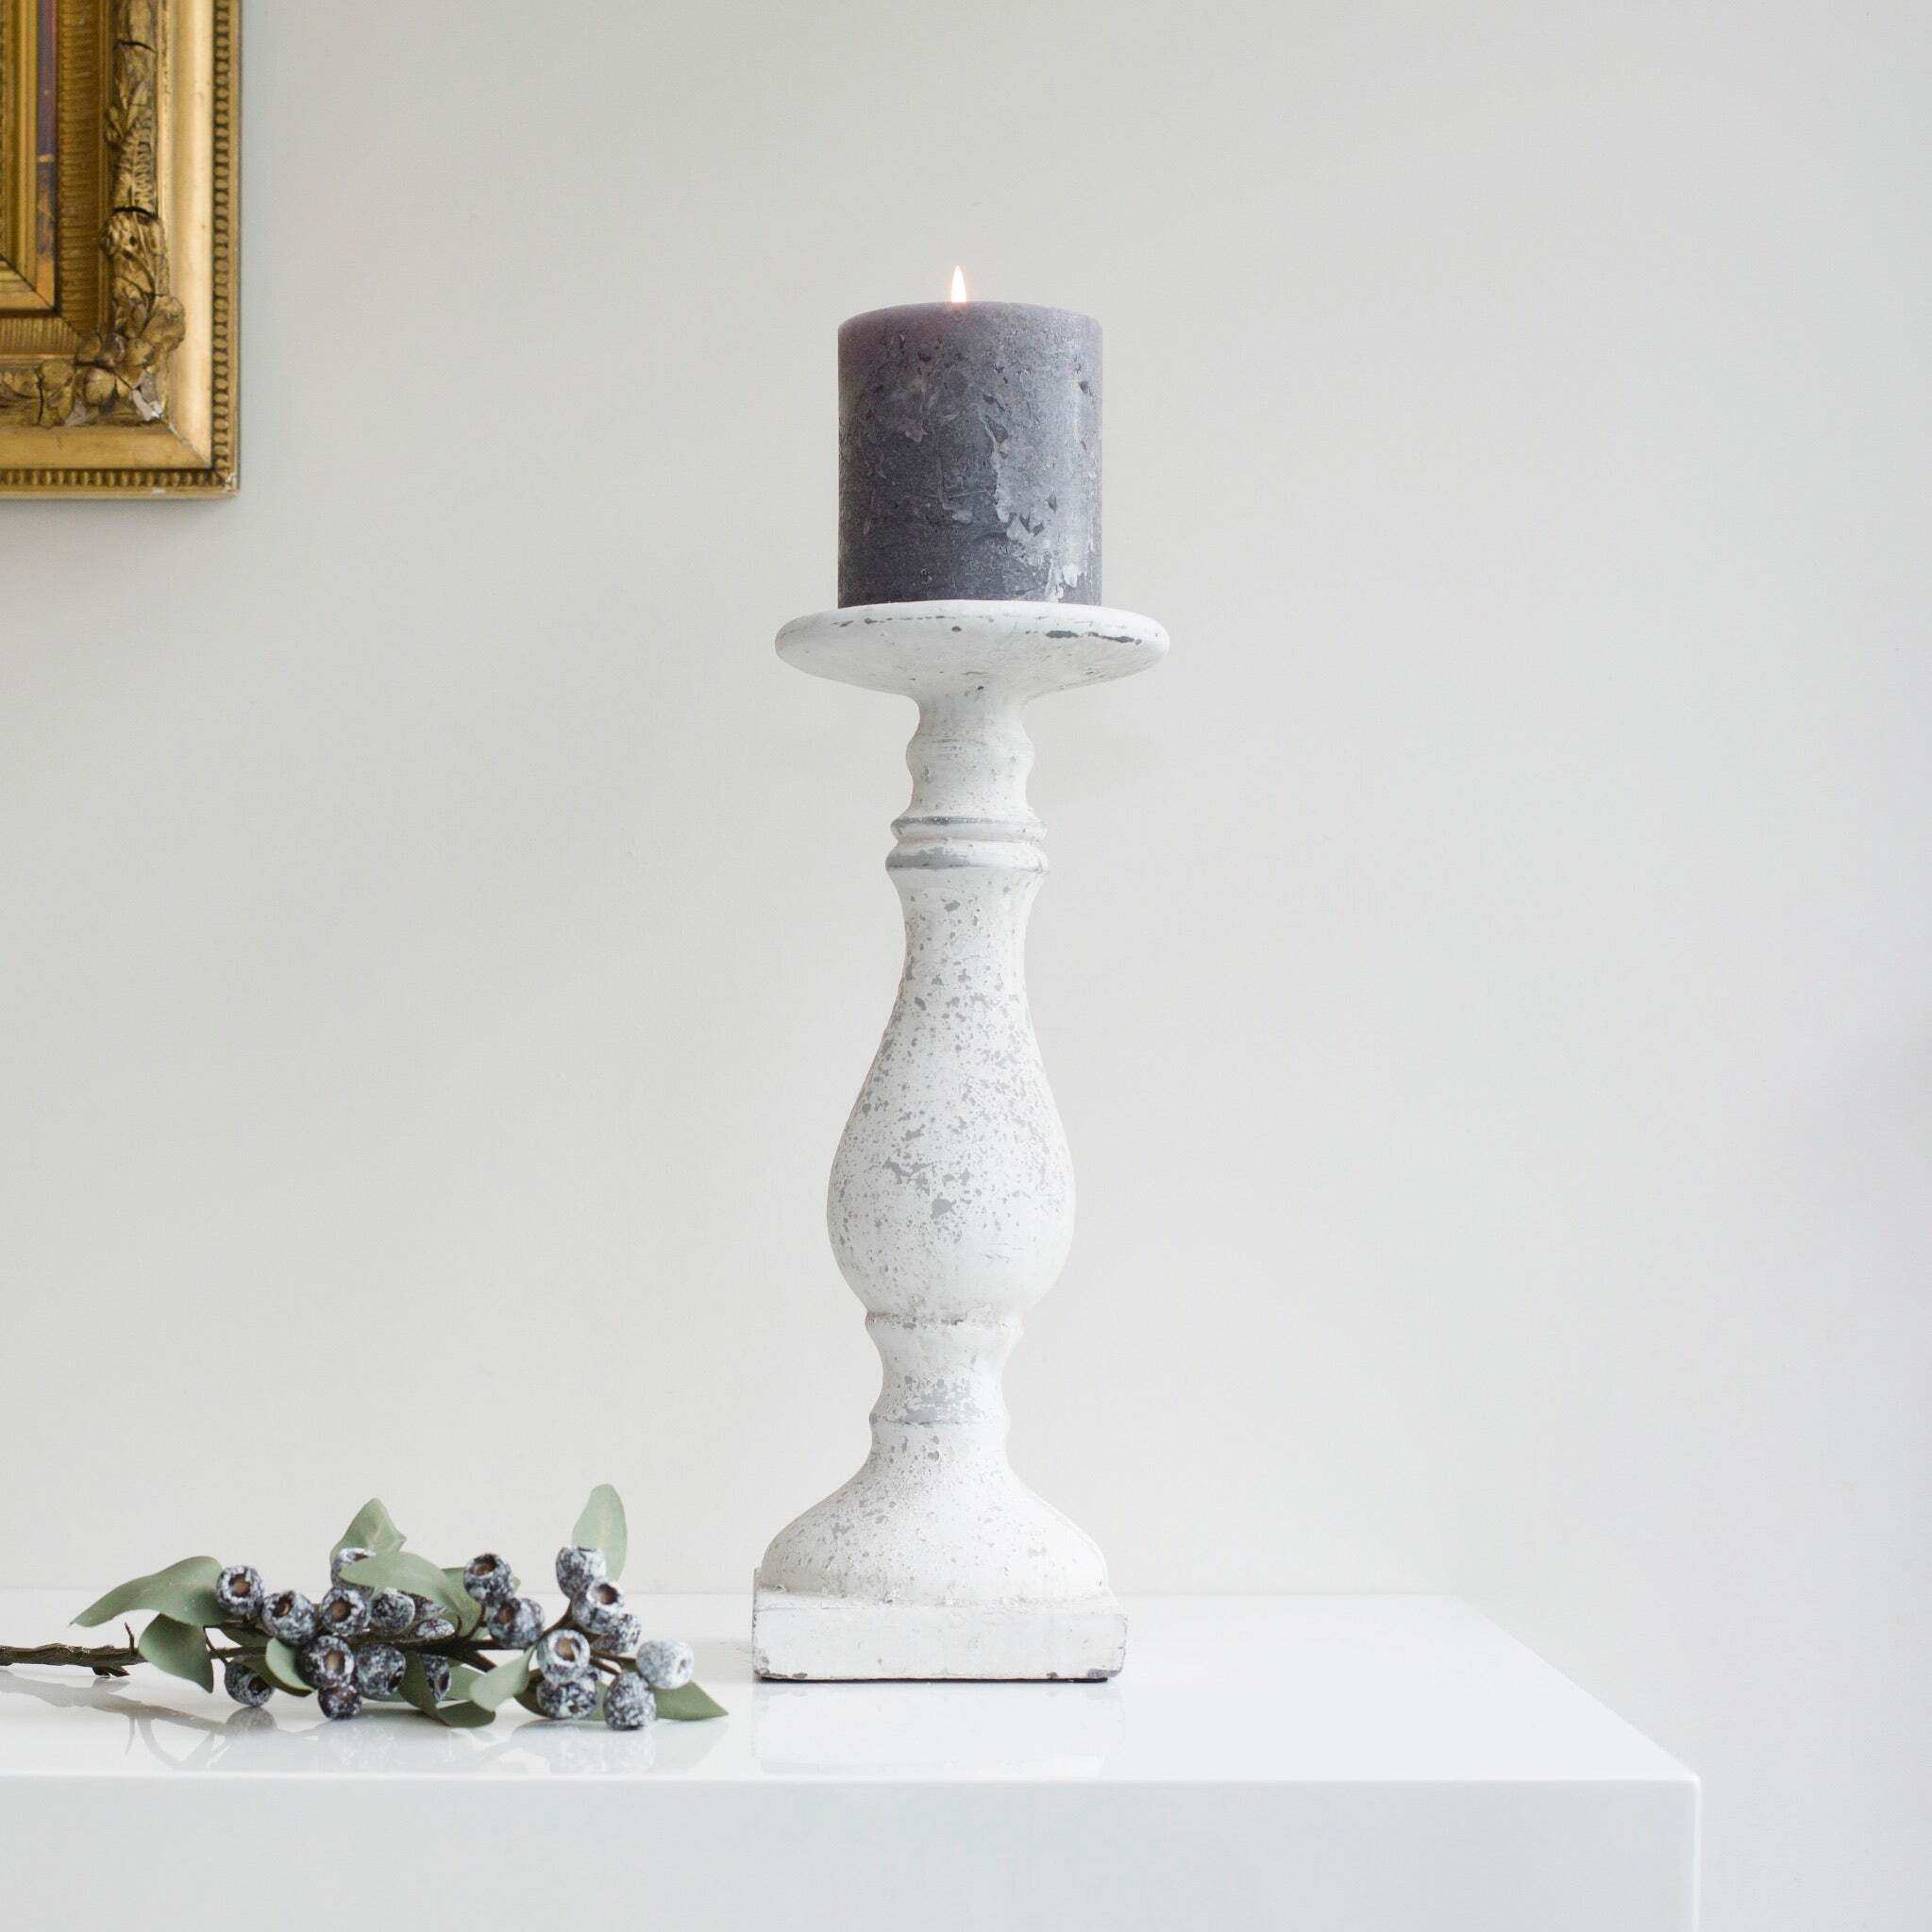 Kingham Stone Candlestick - Available in Two Sizes